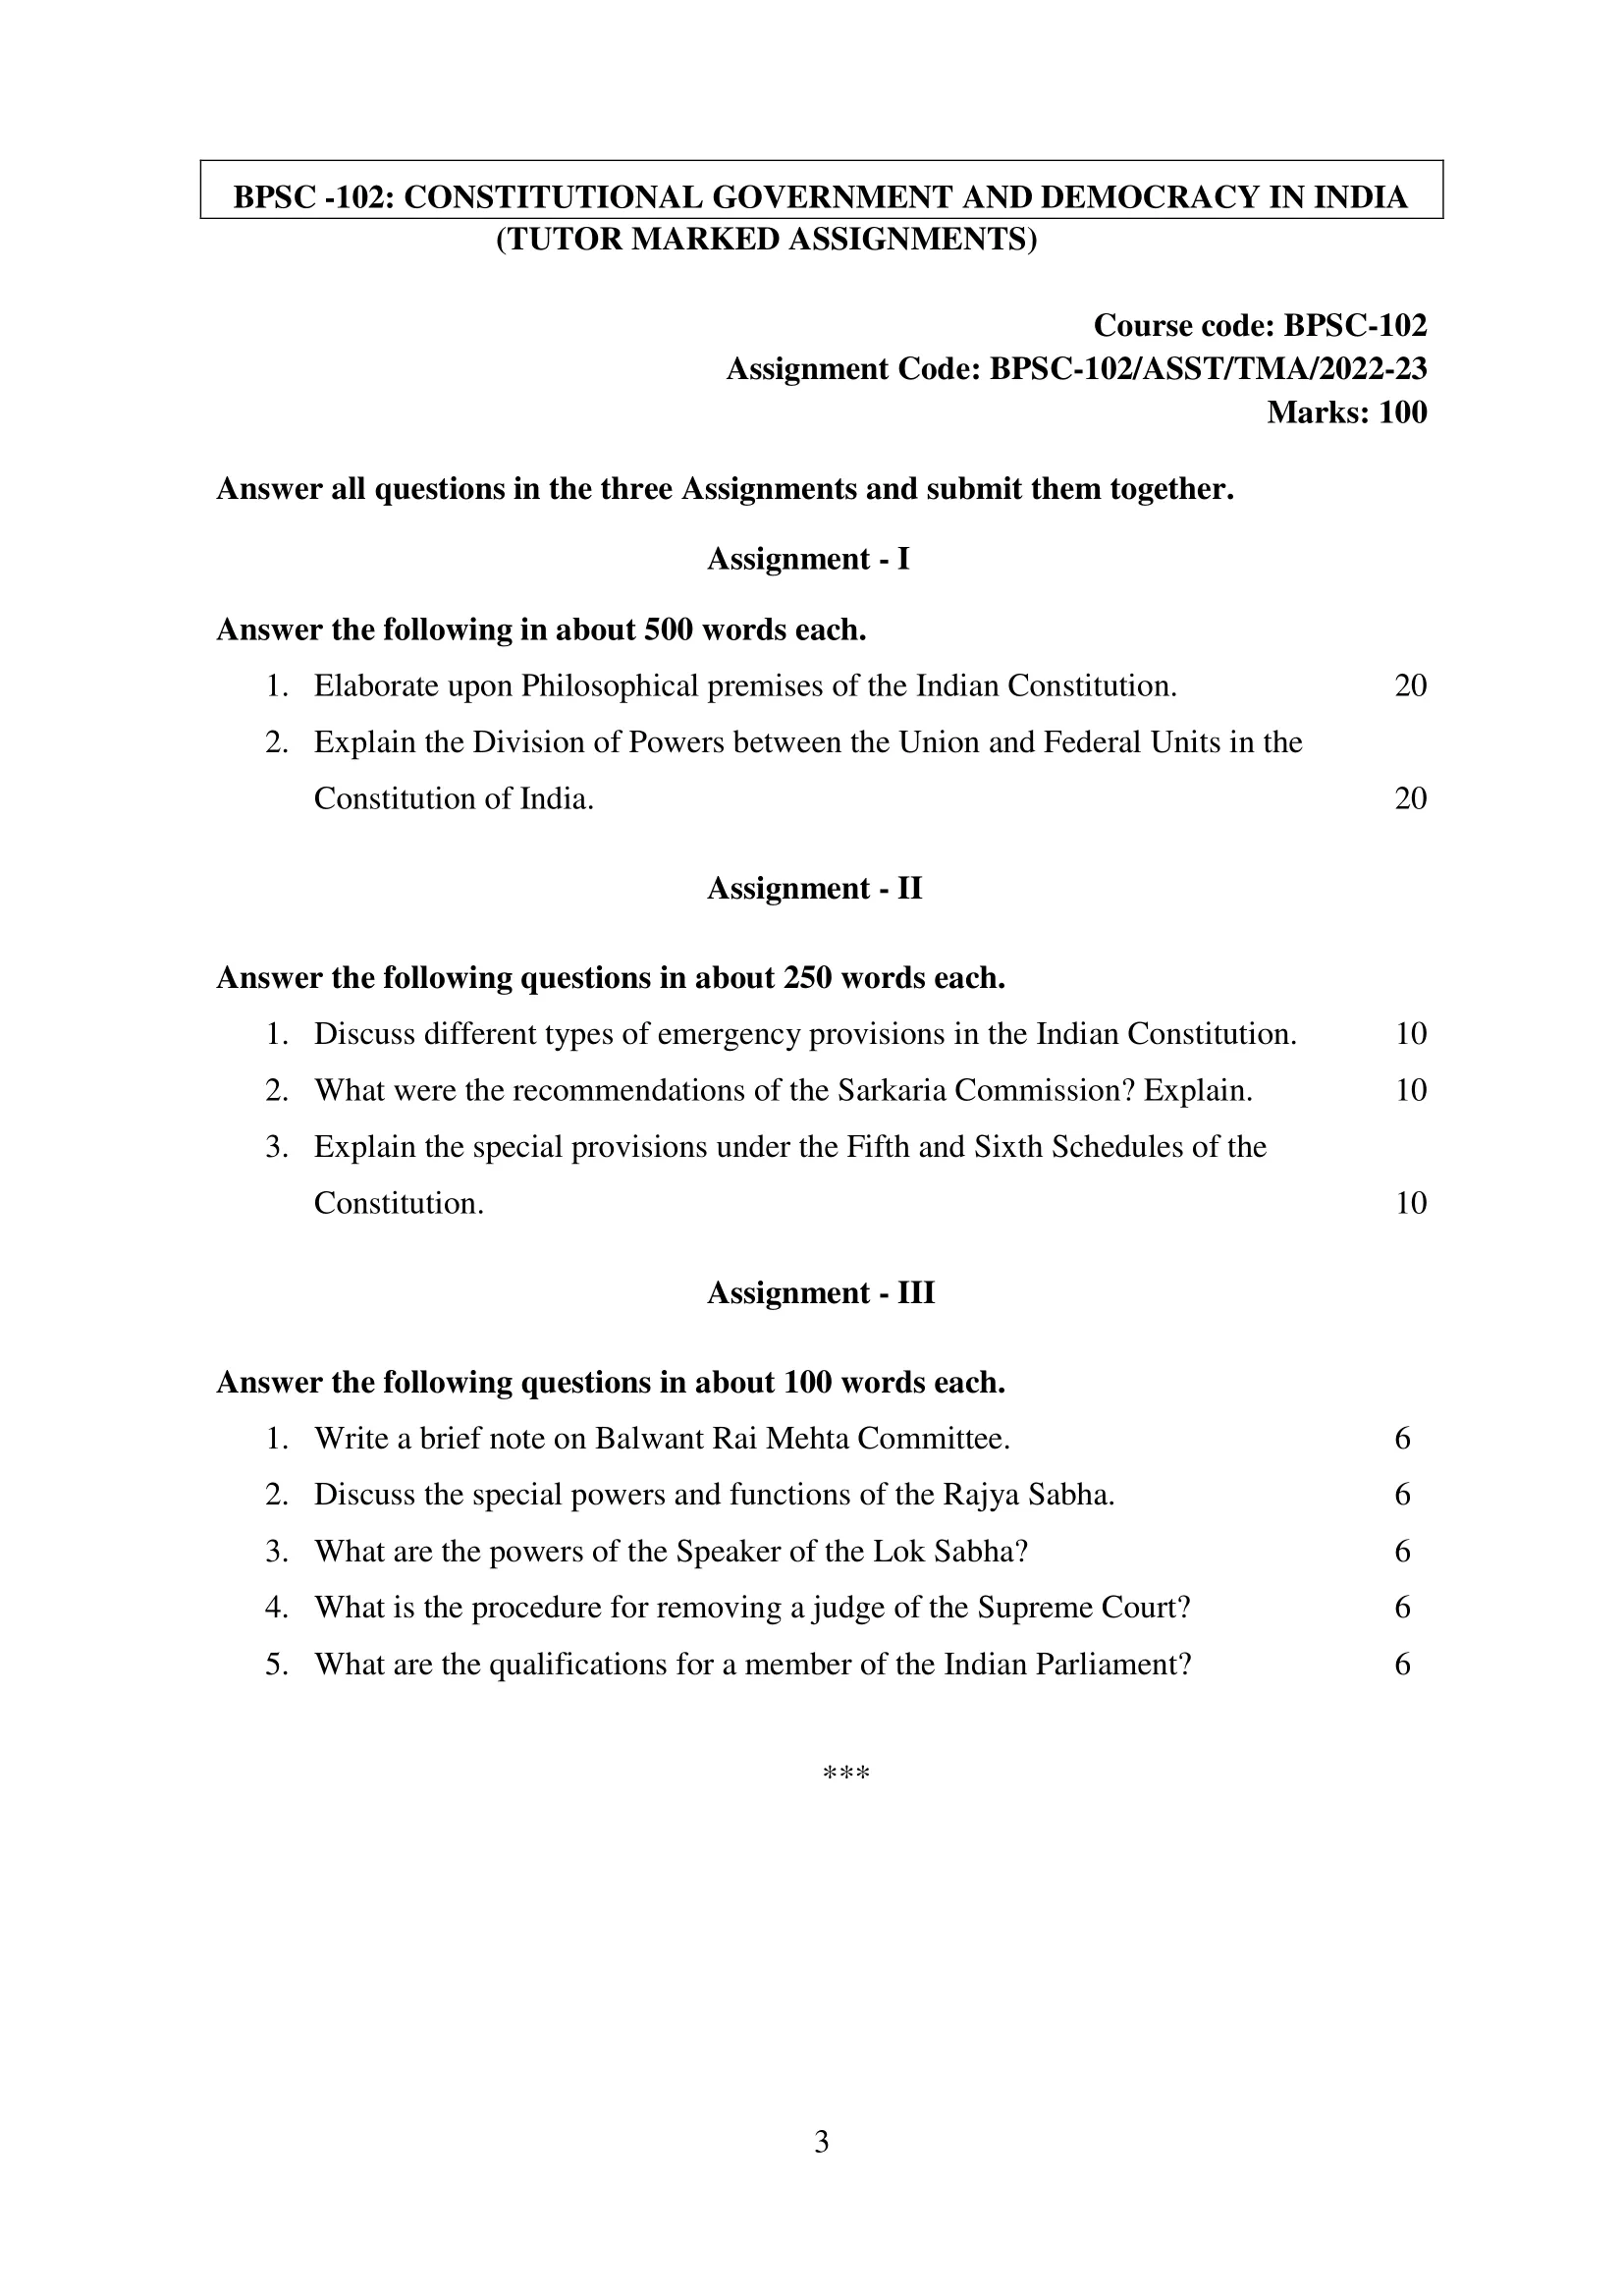 BPSC-102 IGNOU BAG Solved Assignment-CONSTITUTIONAL GOVERNMENT AND DEMOCRACY IN INDIA